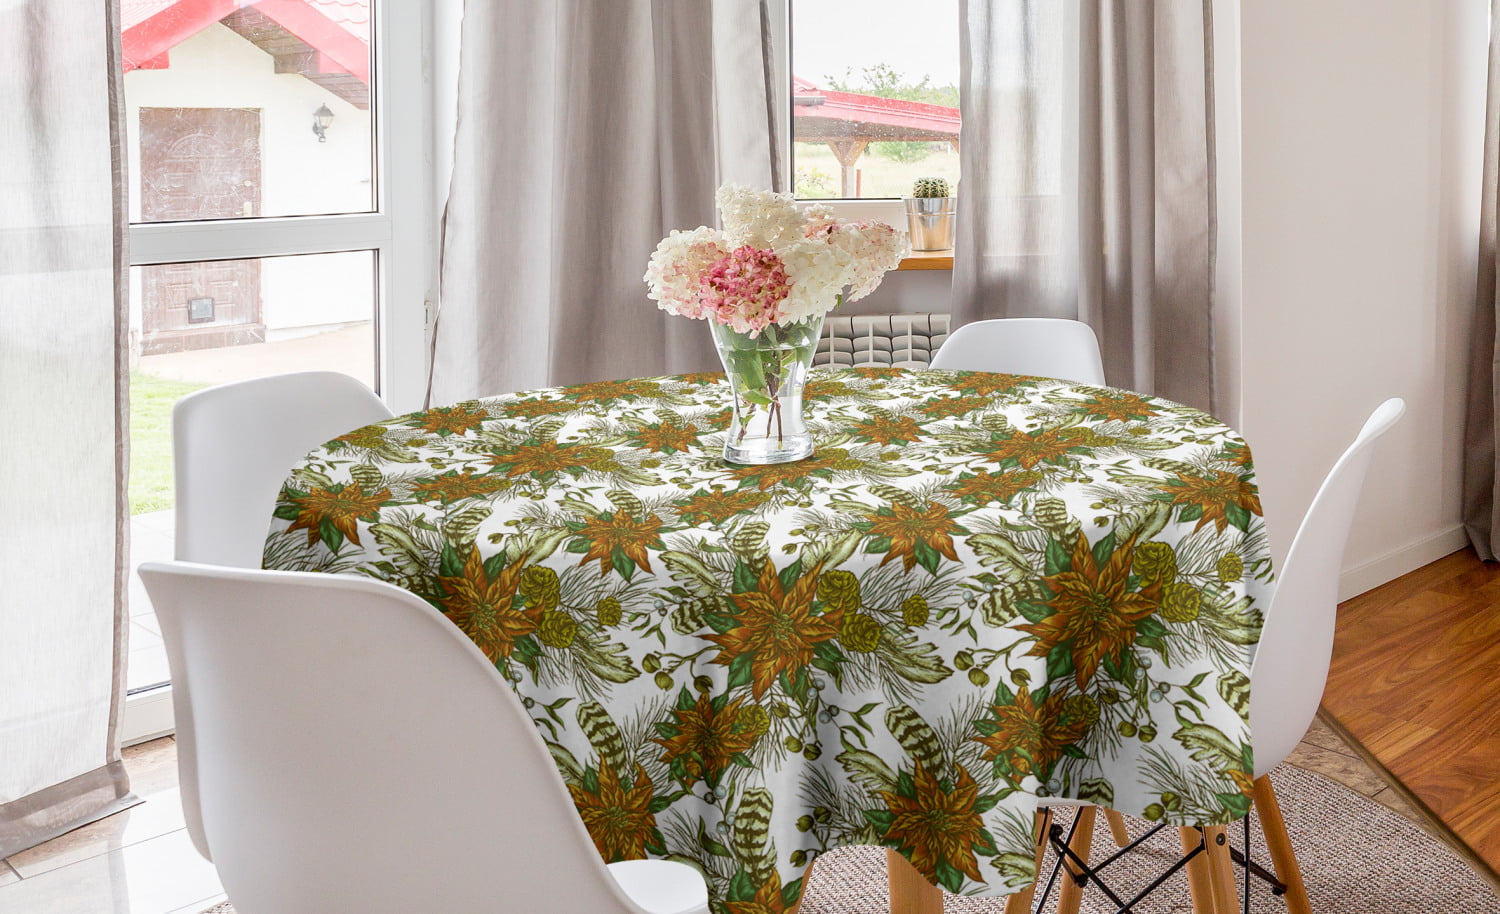 Orange Flower Yellow Sunflower Square Tablecloth 60 x 60 Inch Romantic Table Cover Mat Modern Table Cloth for Kitchen Dining Room Party Wedding Home Decoration